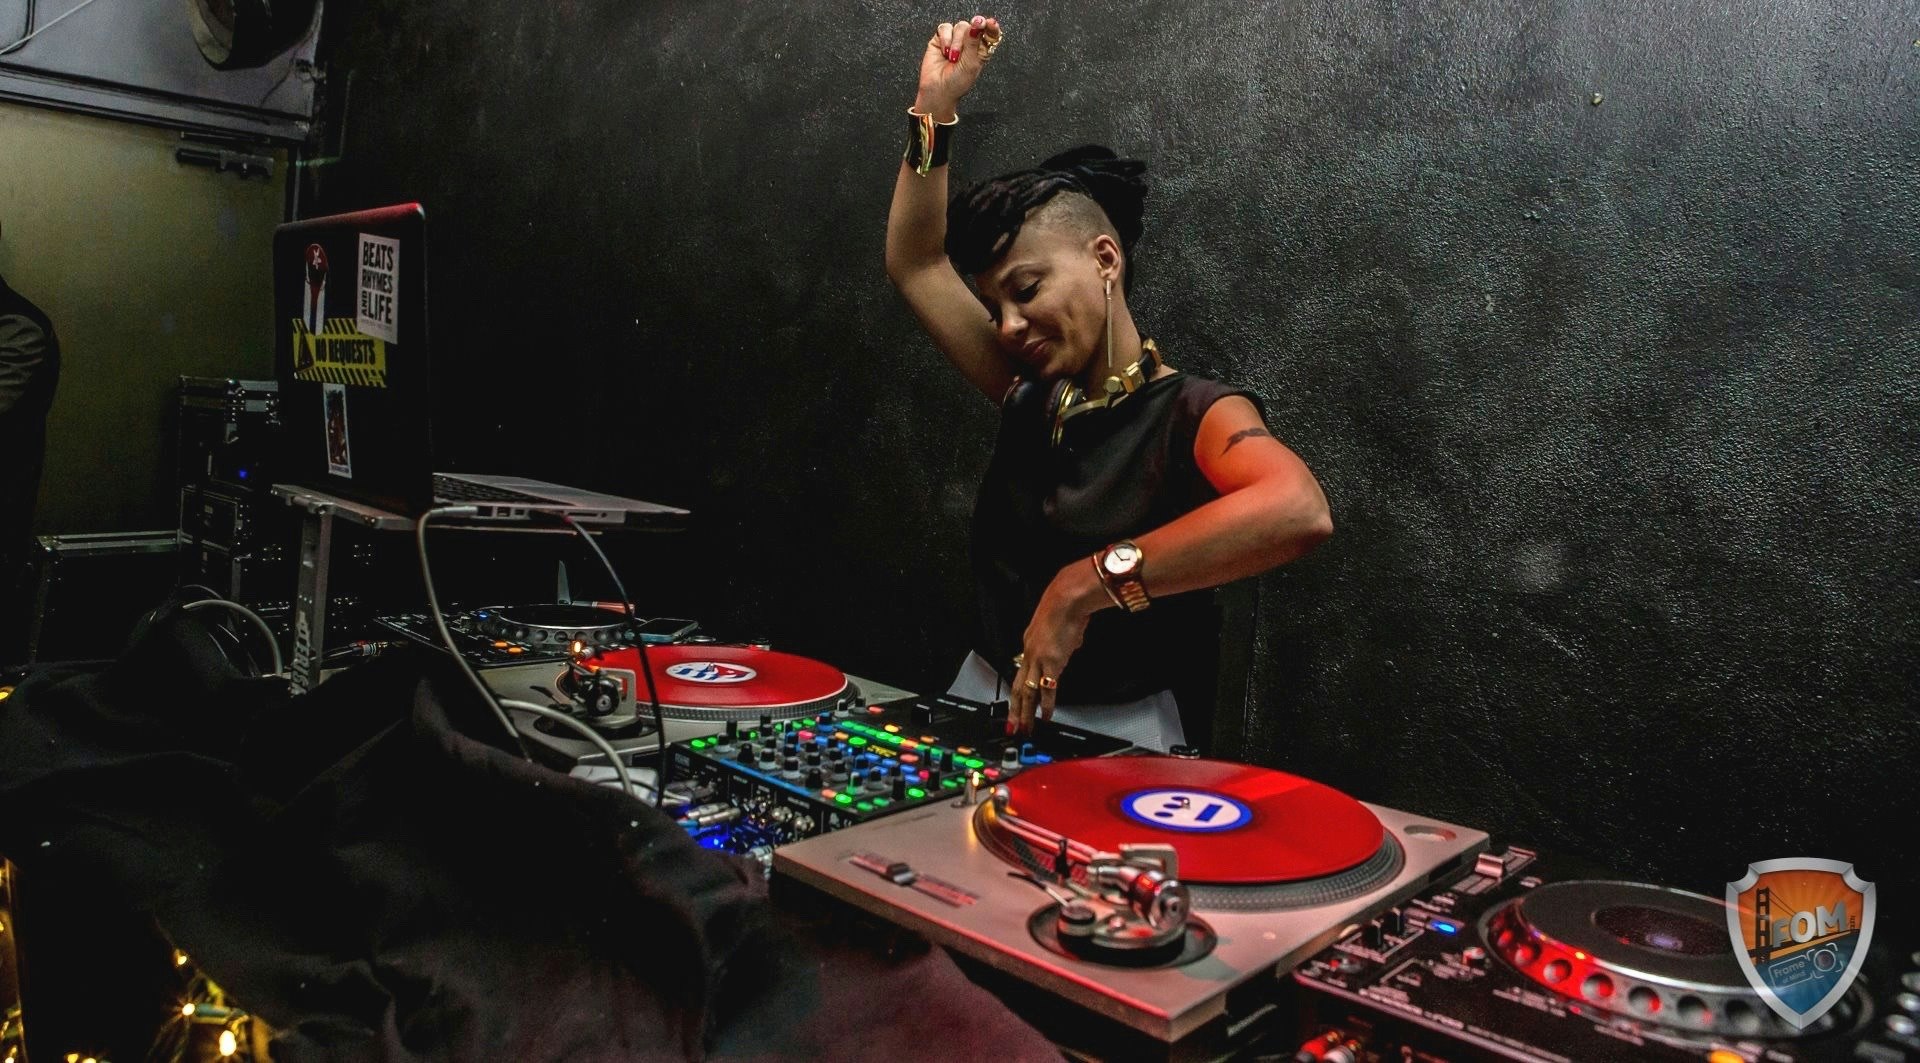 For the Record: After 10 Years, one of Cuba’s first female DJs returns home